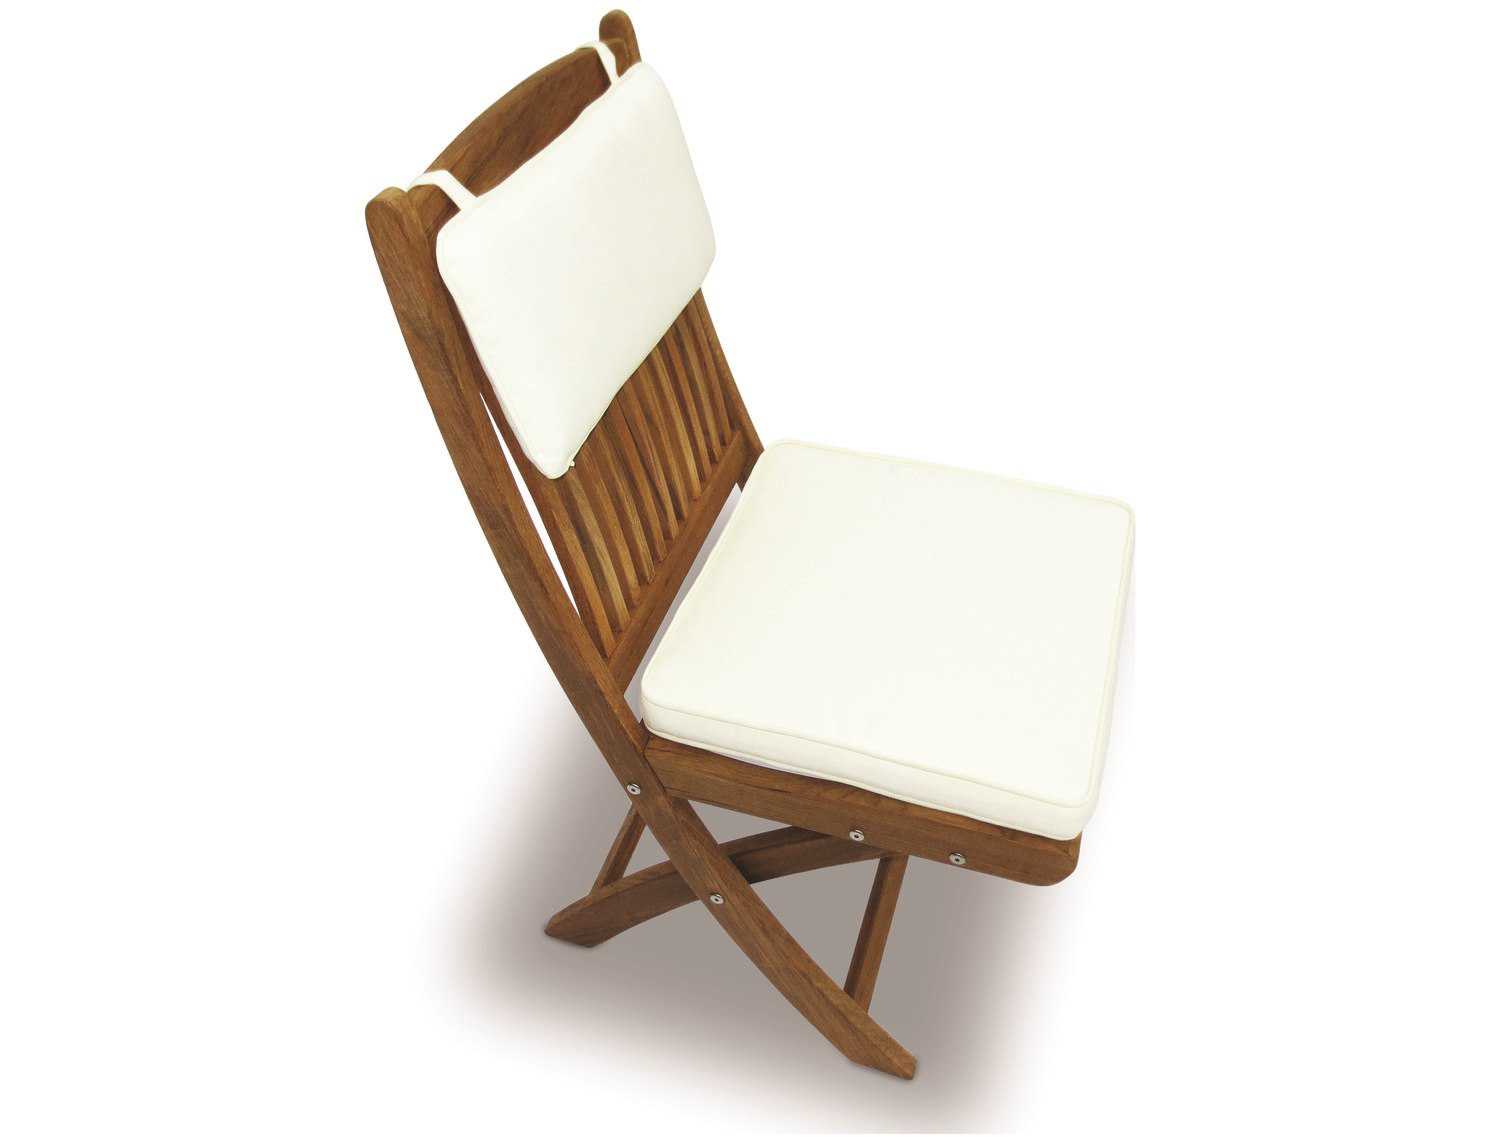 Replacement Cushion for Wood Folding Chairs